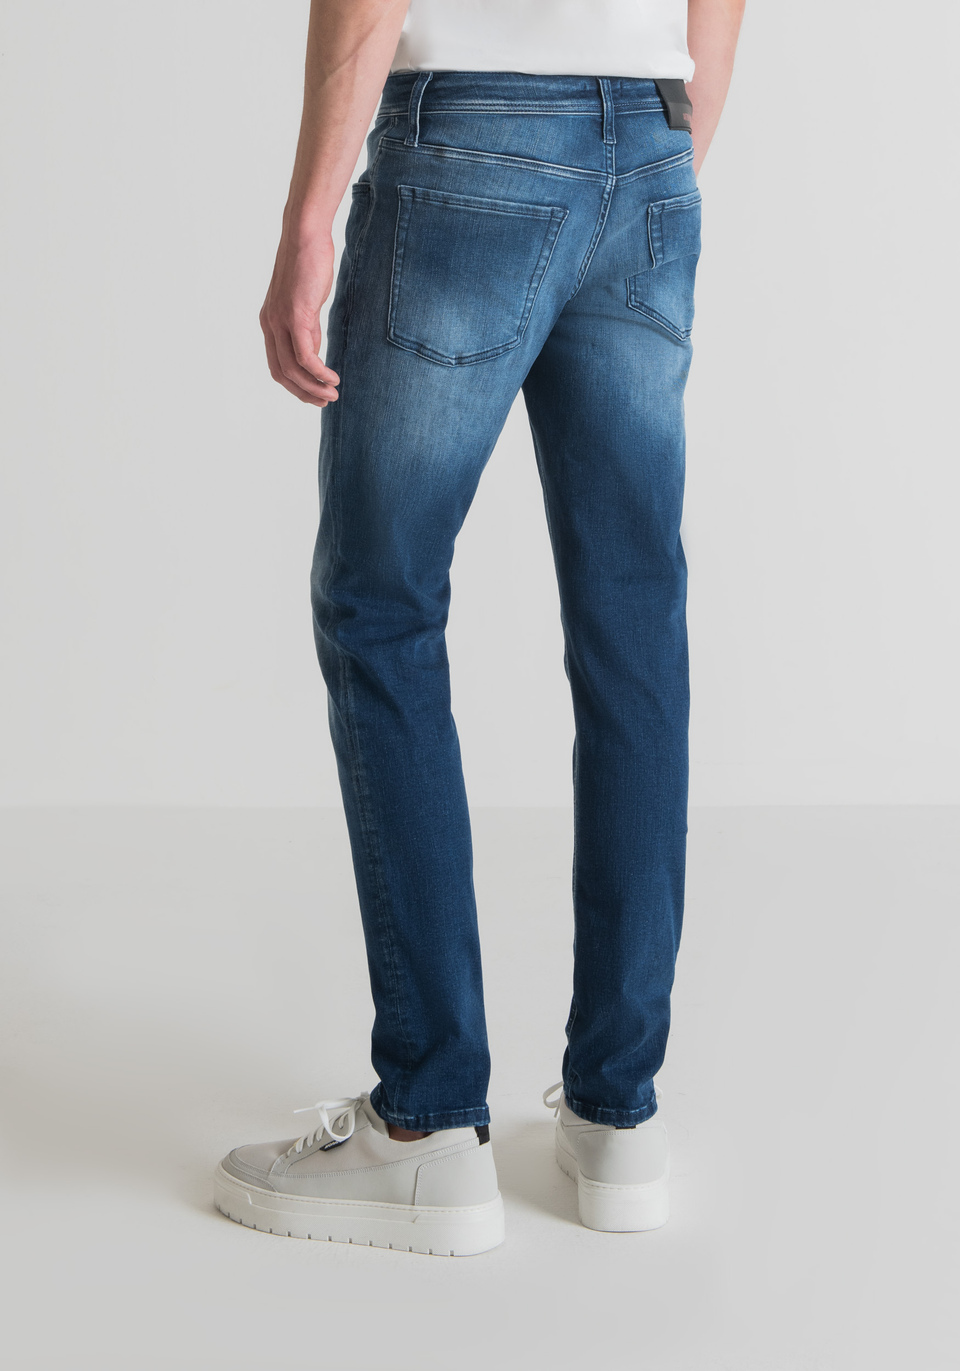 "OZZY" TAPERED FIT JEANS IN POWER STRETCH DENIM BLEND WITH ROYAL BLUE WASH - Antony Morato Online Shop